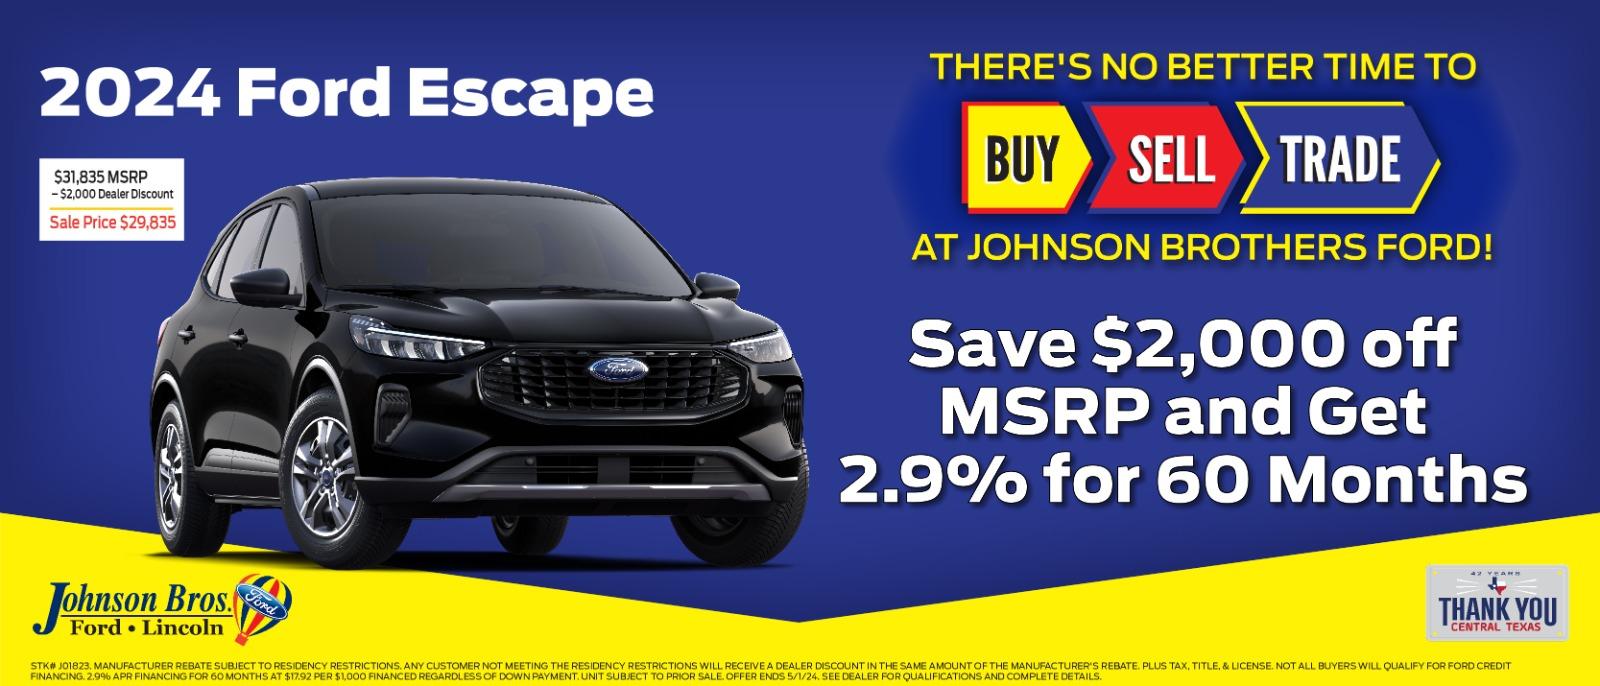 2024 Ford Escape

Save $2,000 off MSRP and get 2.9% for 60 months